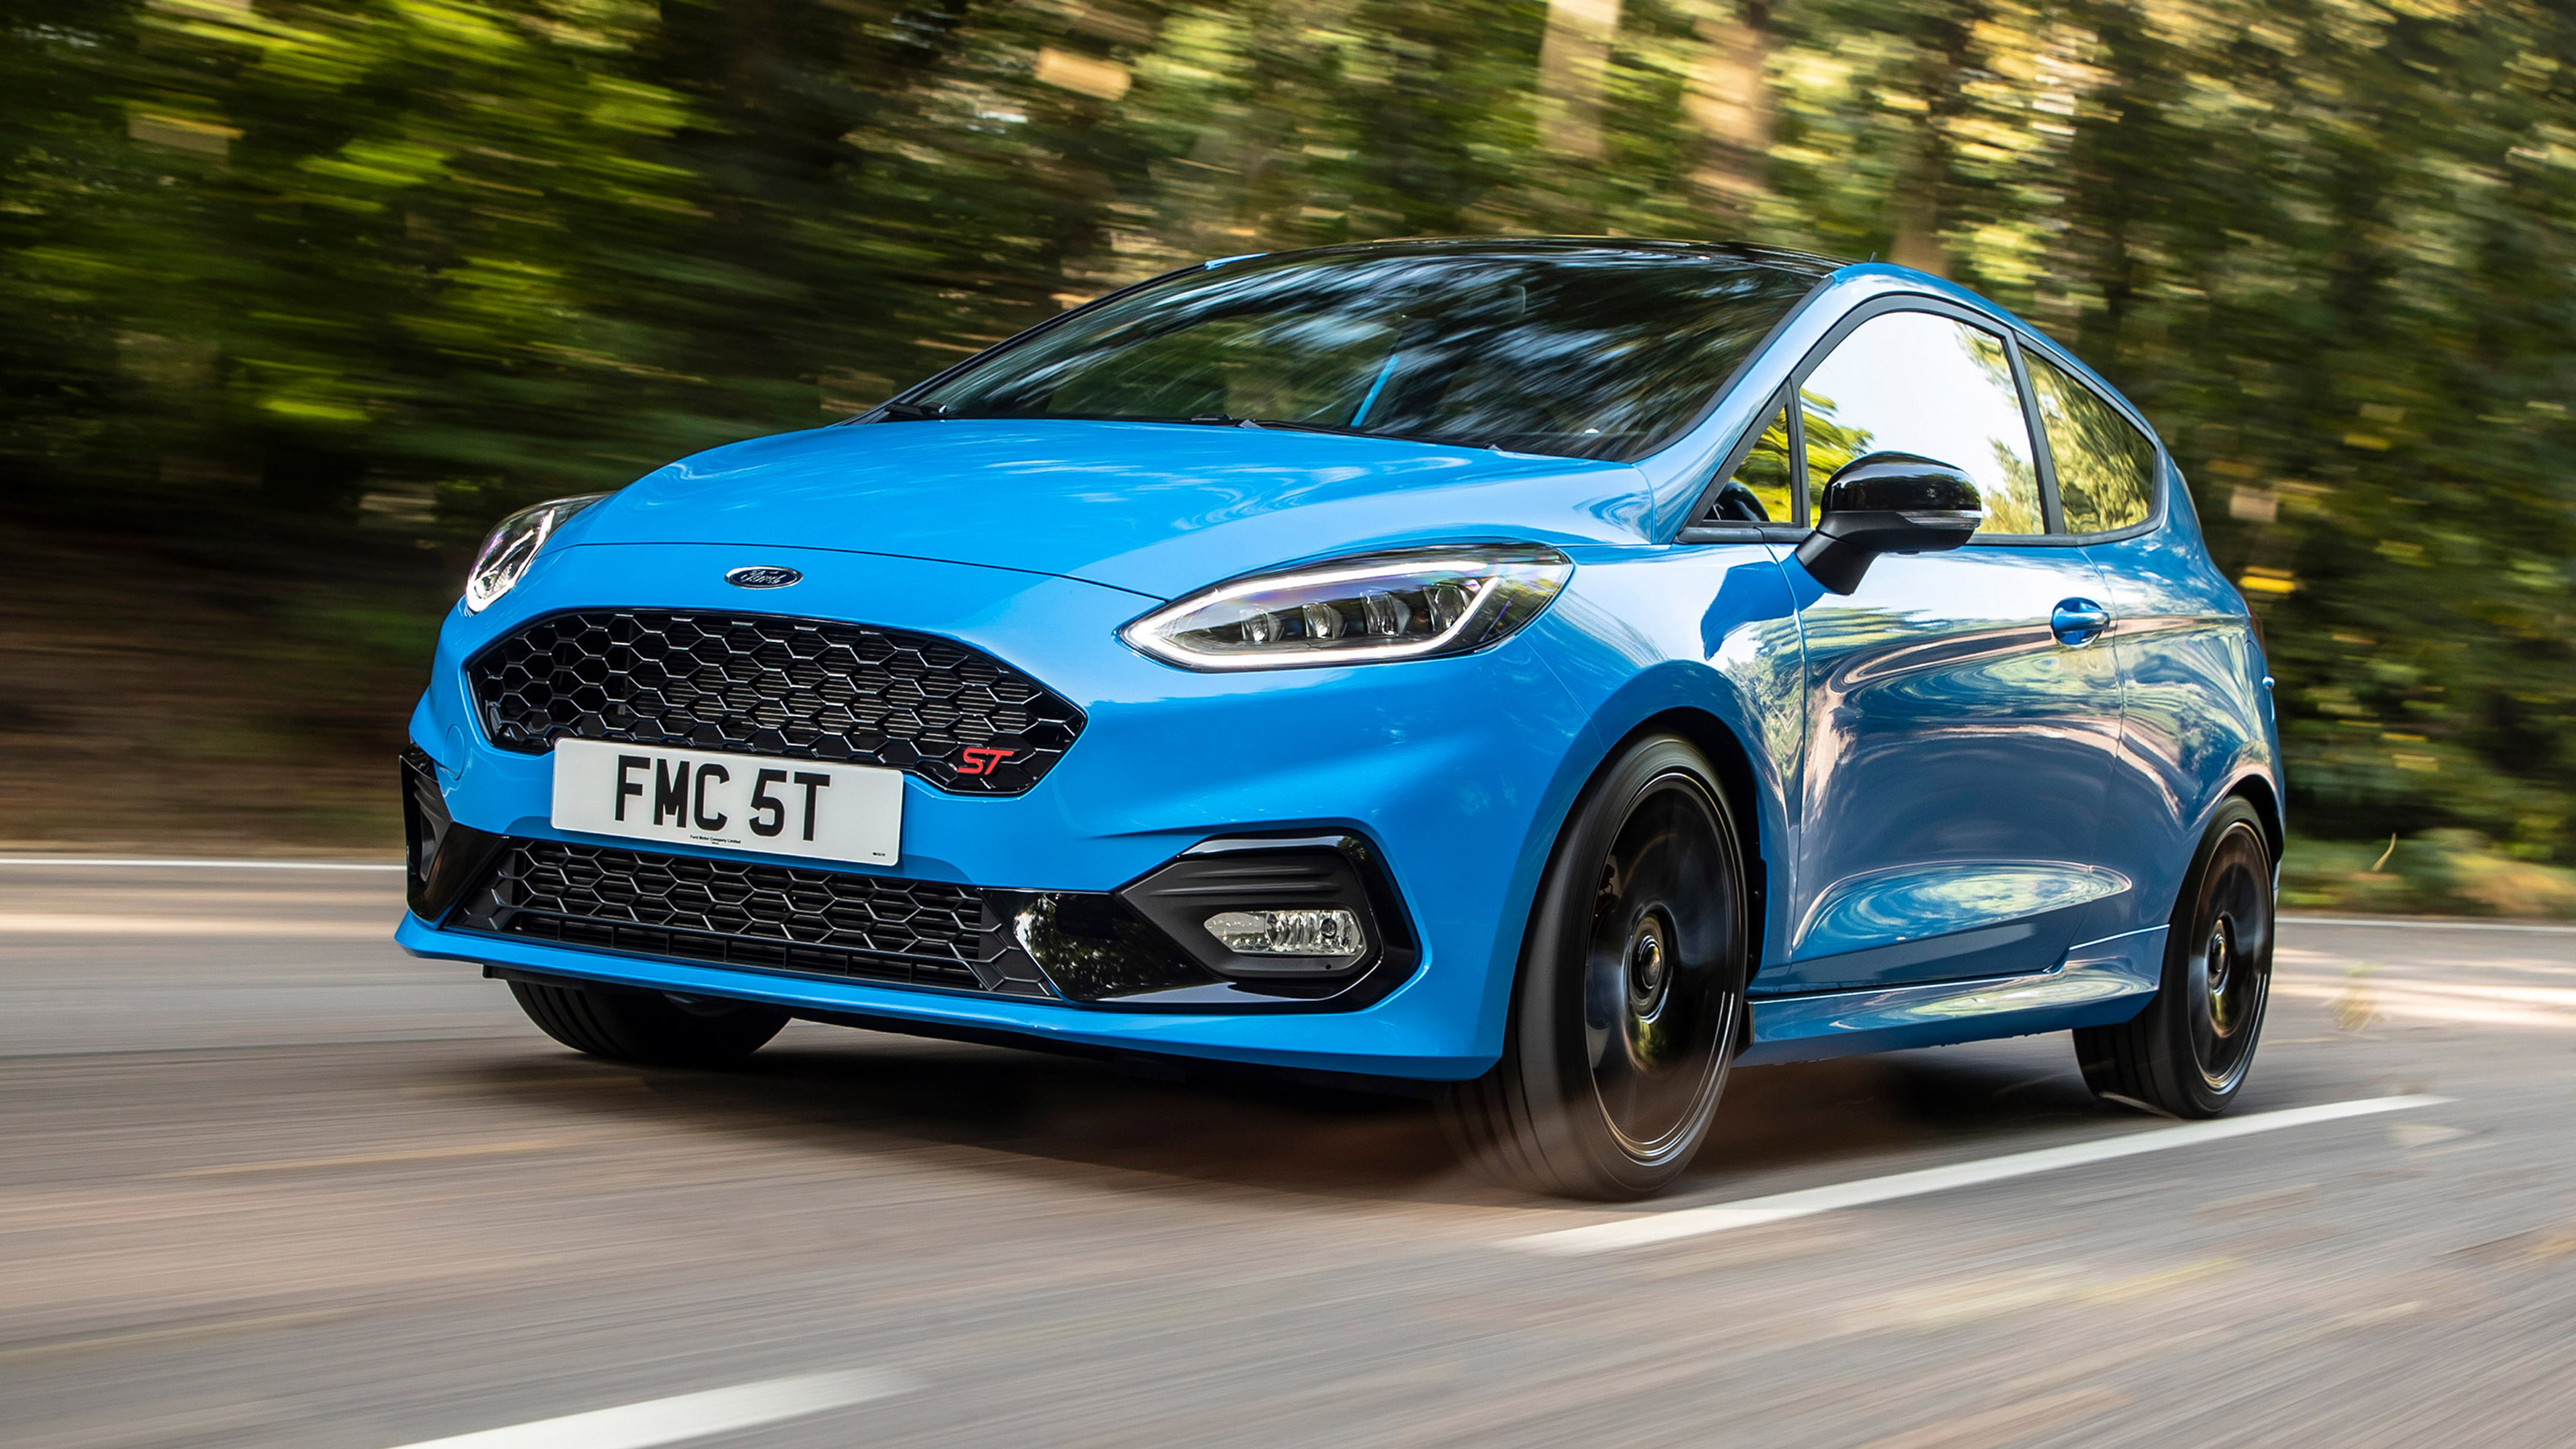 How to choose the best Ford Fiesta for you